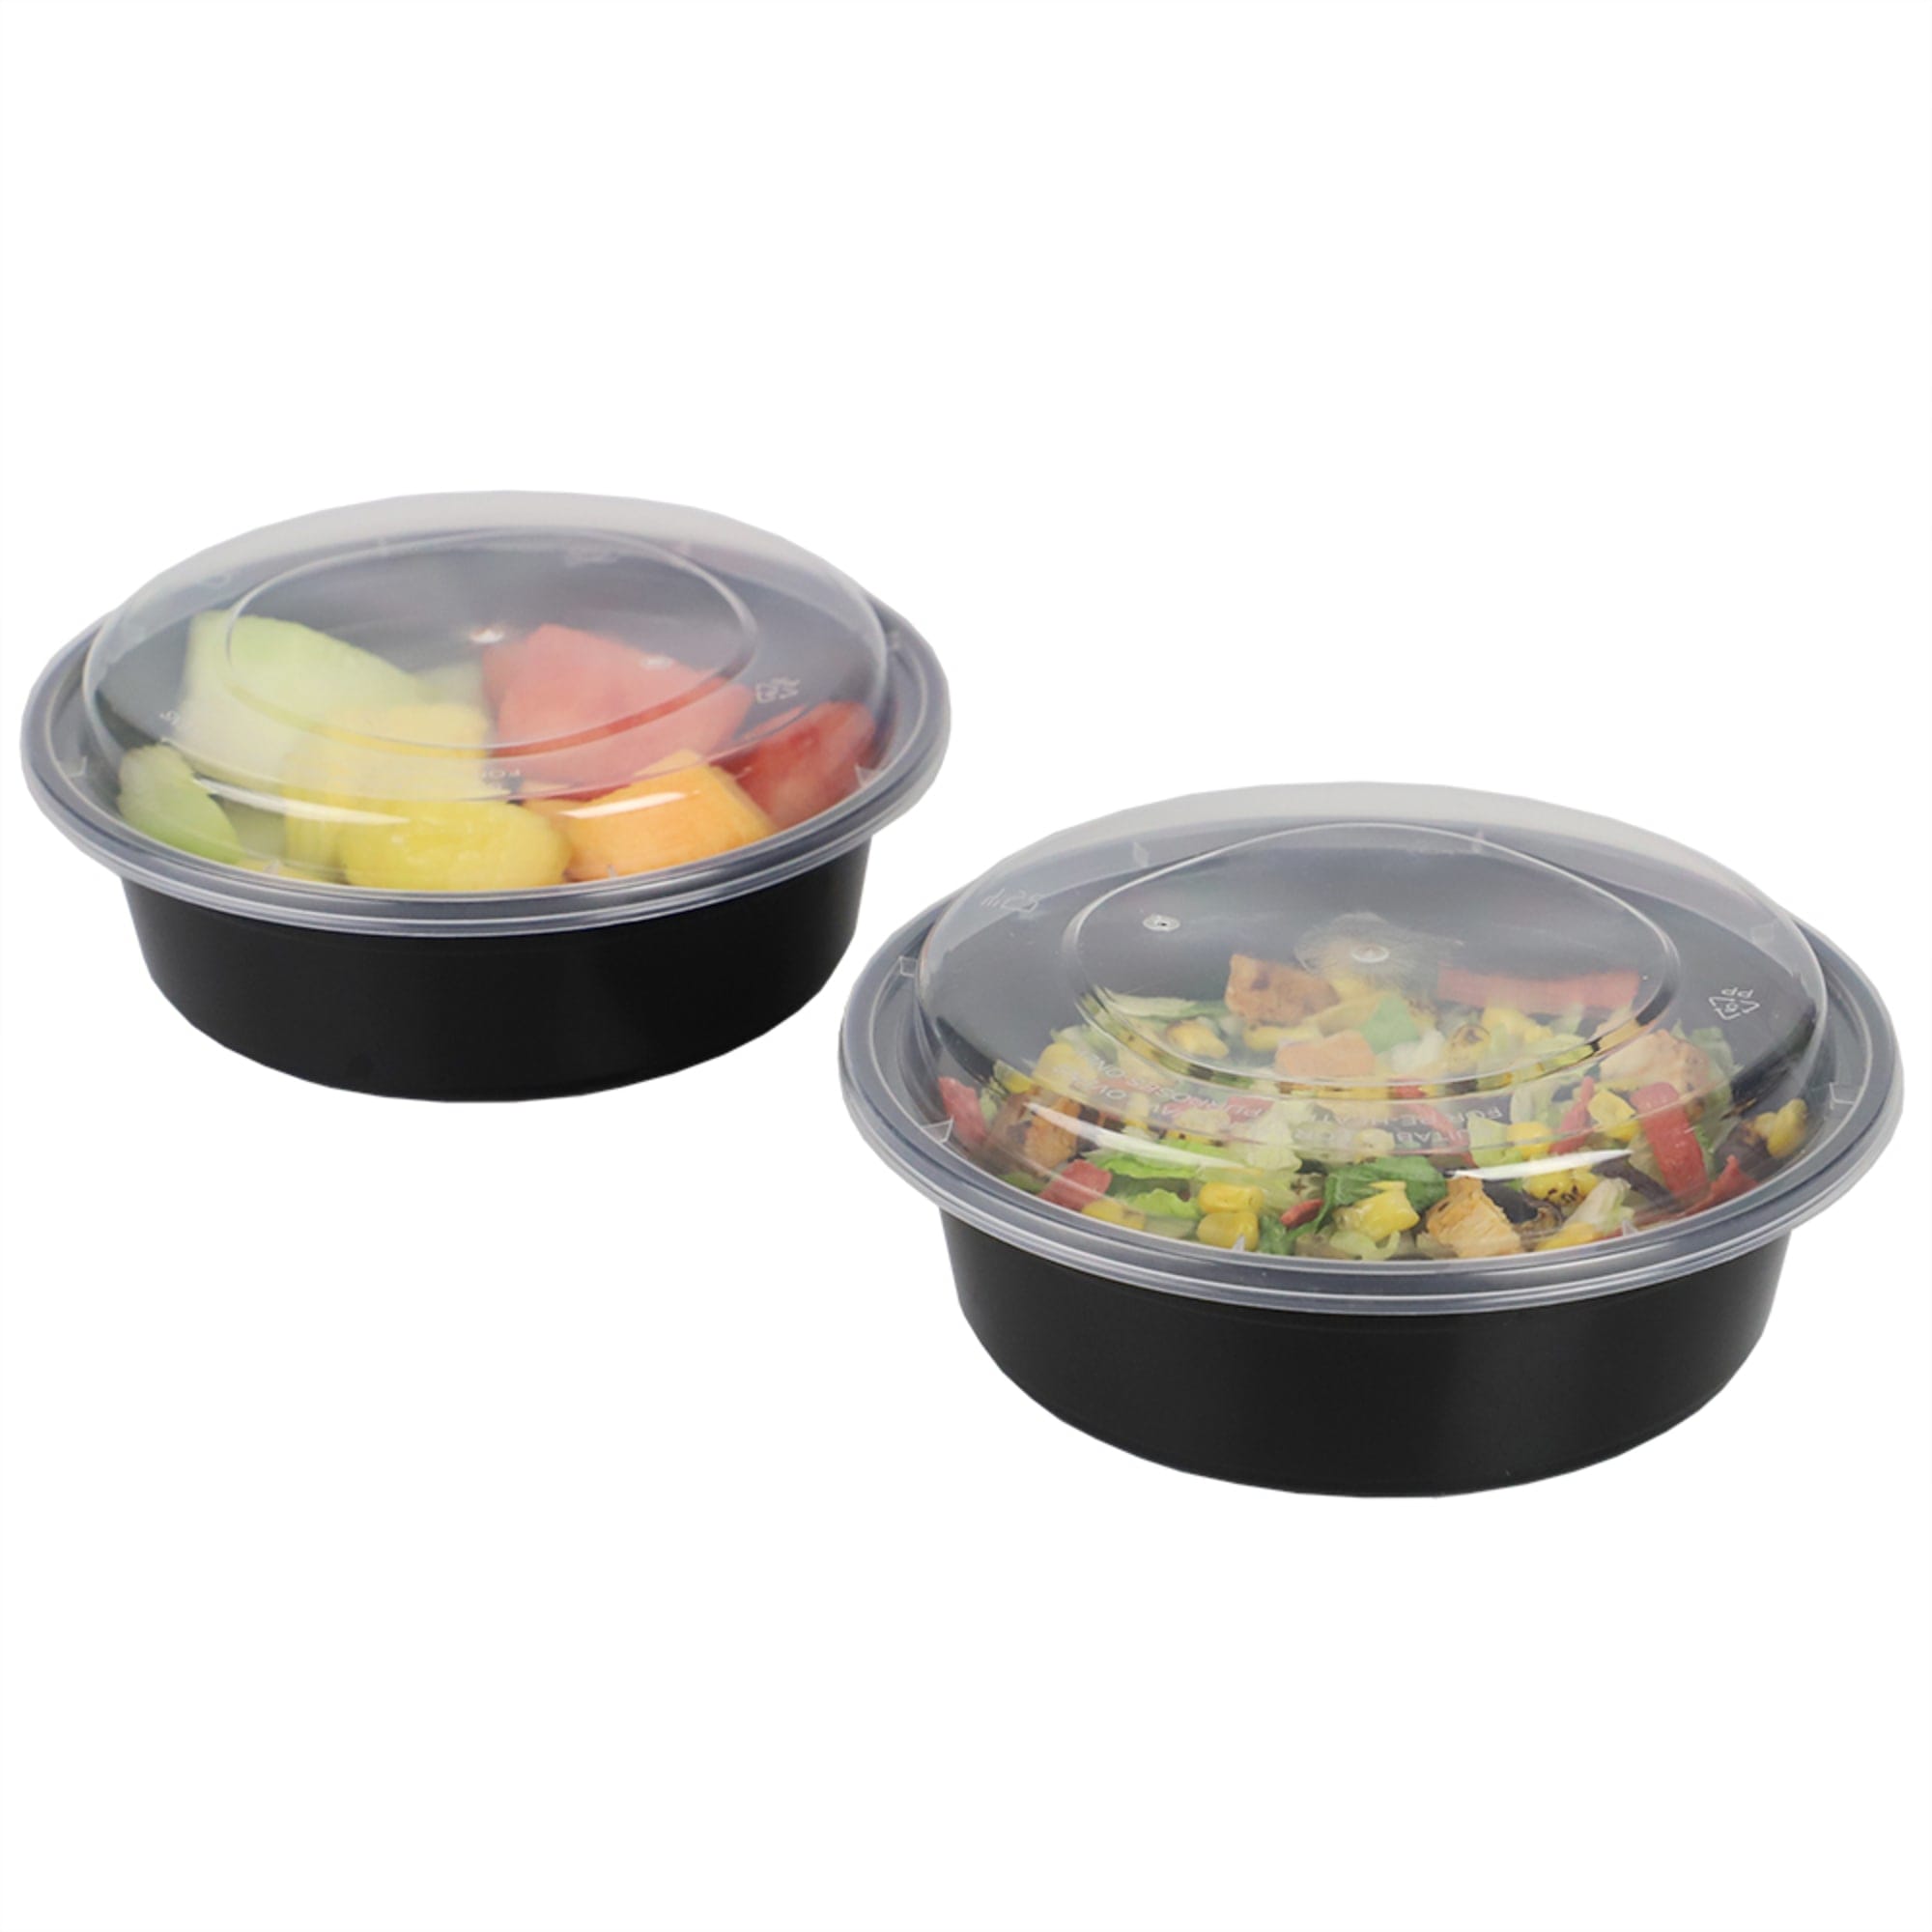 Home Basics 20 Piece Round Plastic Meal Prep Set with Lids, Black $3.00 EACH, CASE PACK OF 12